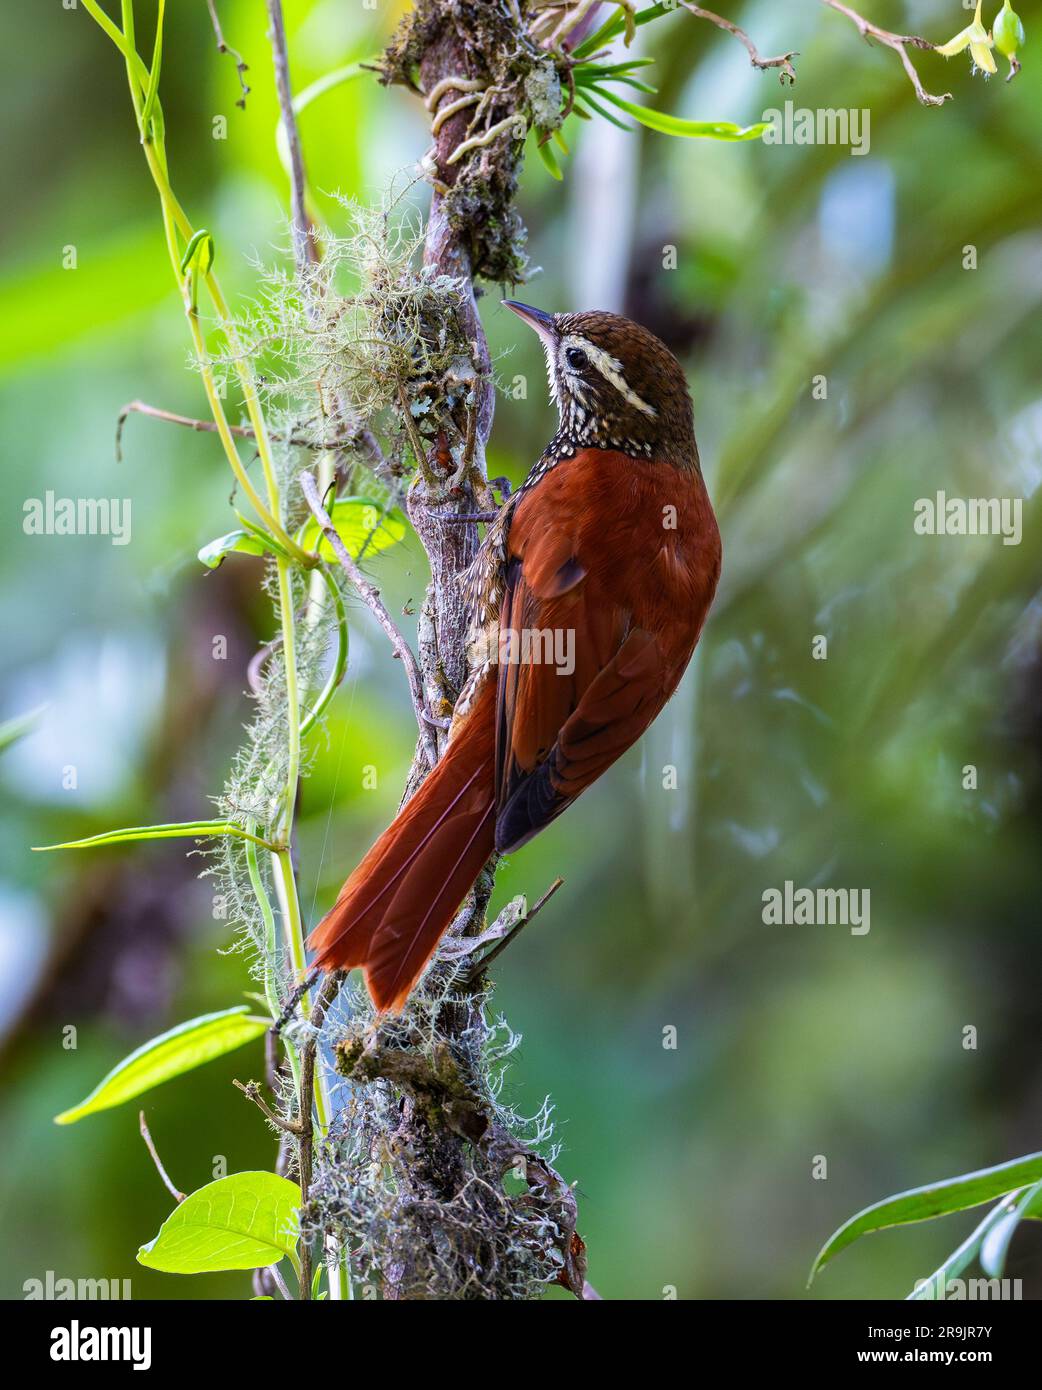 A Pearled Treerunner (Margarornis squamiger) foraging on a branch. Colombia, South America. Stock Photo